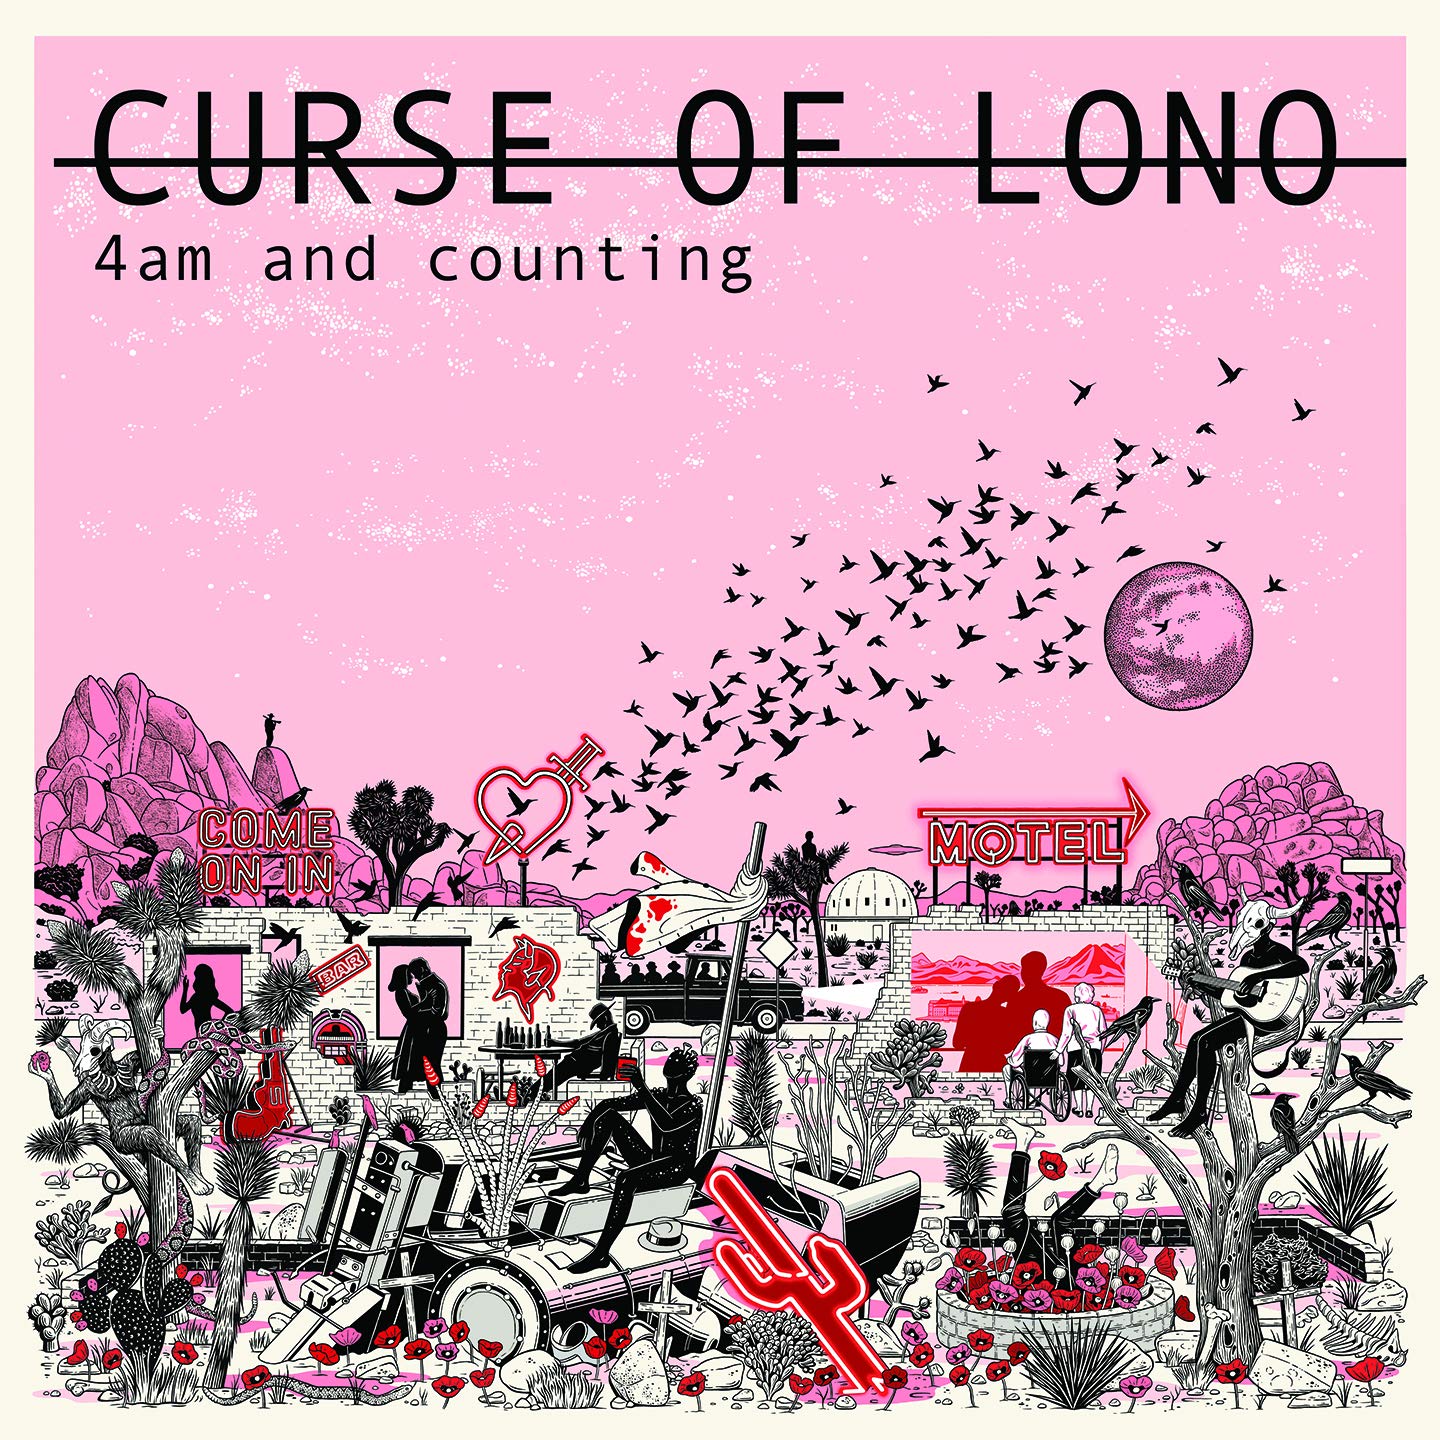 Curse of Lono: 4am and Counting